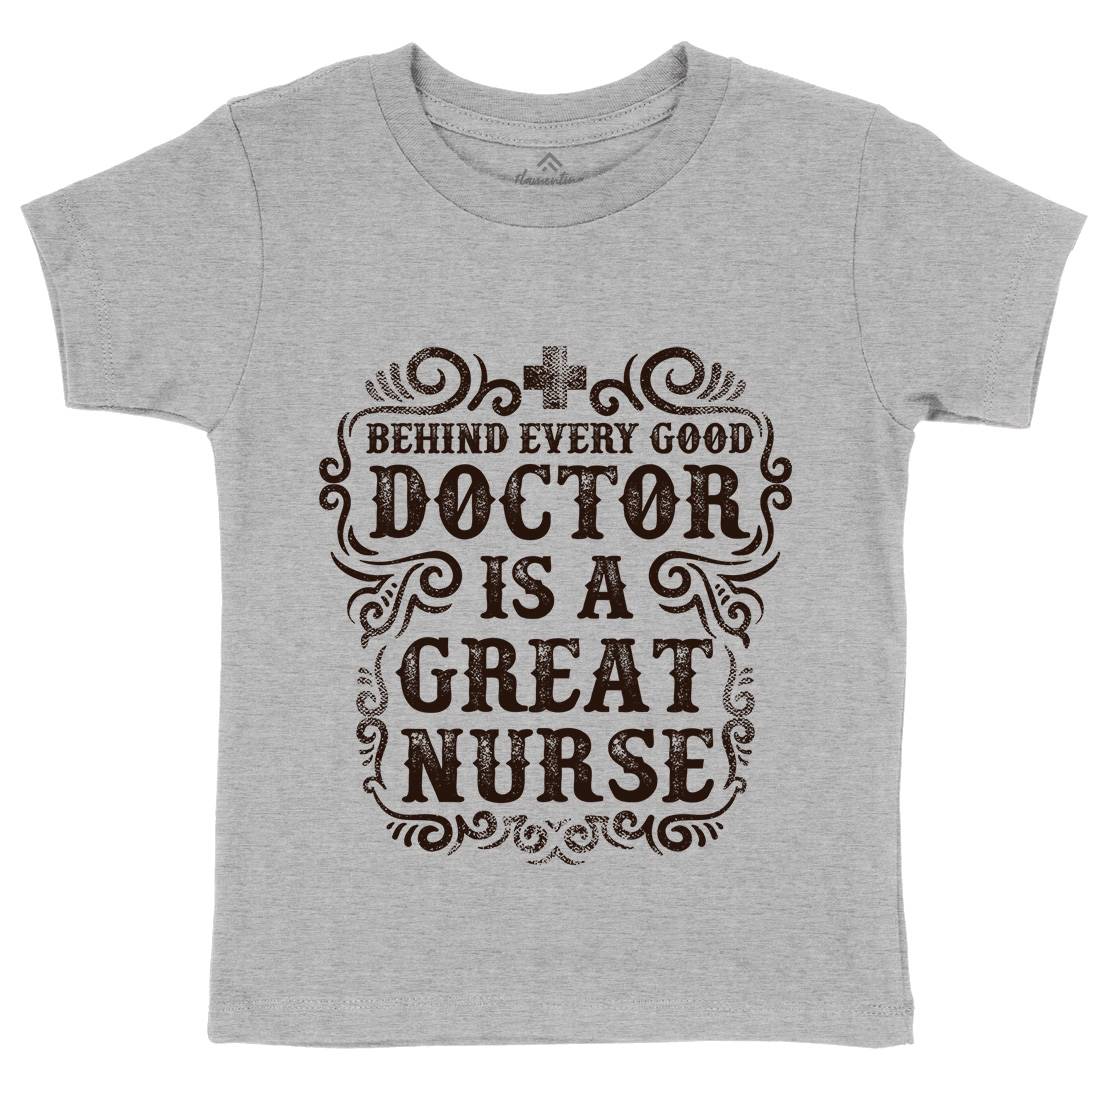 Behind Every Good Doctor Is A Great Nurse Kids Crew Neck T-Shirt Work C910